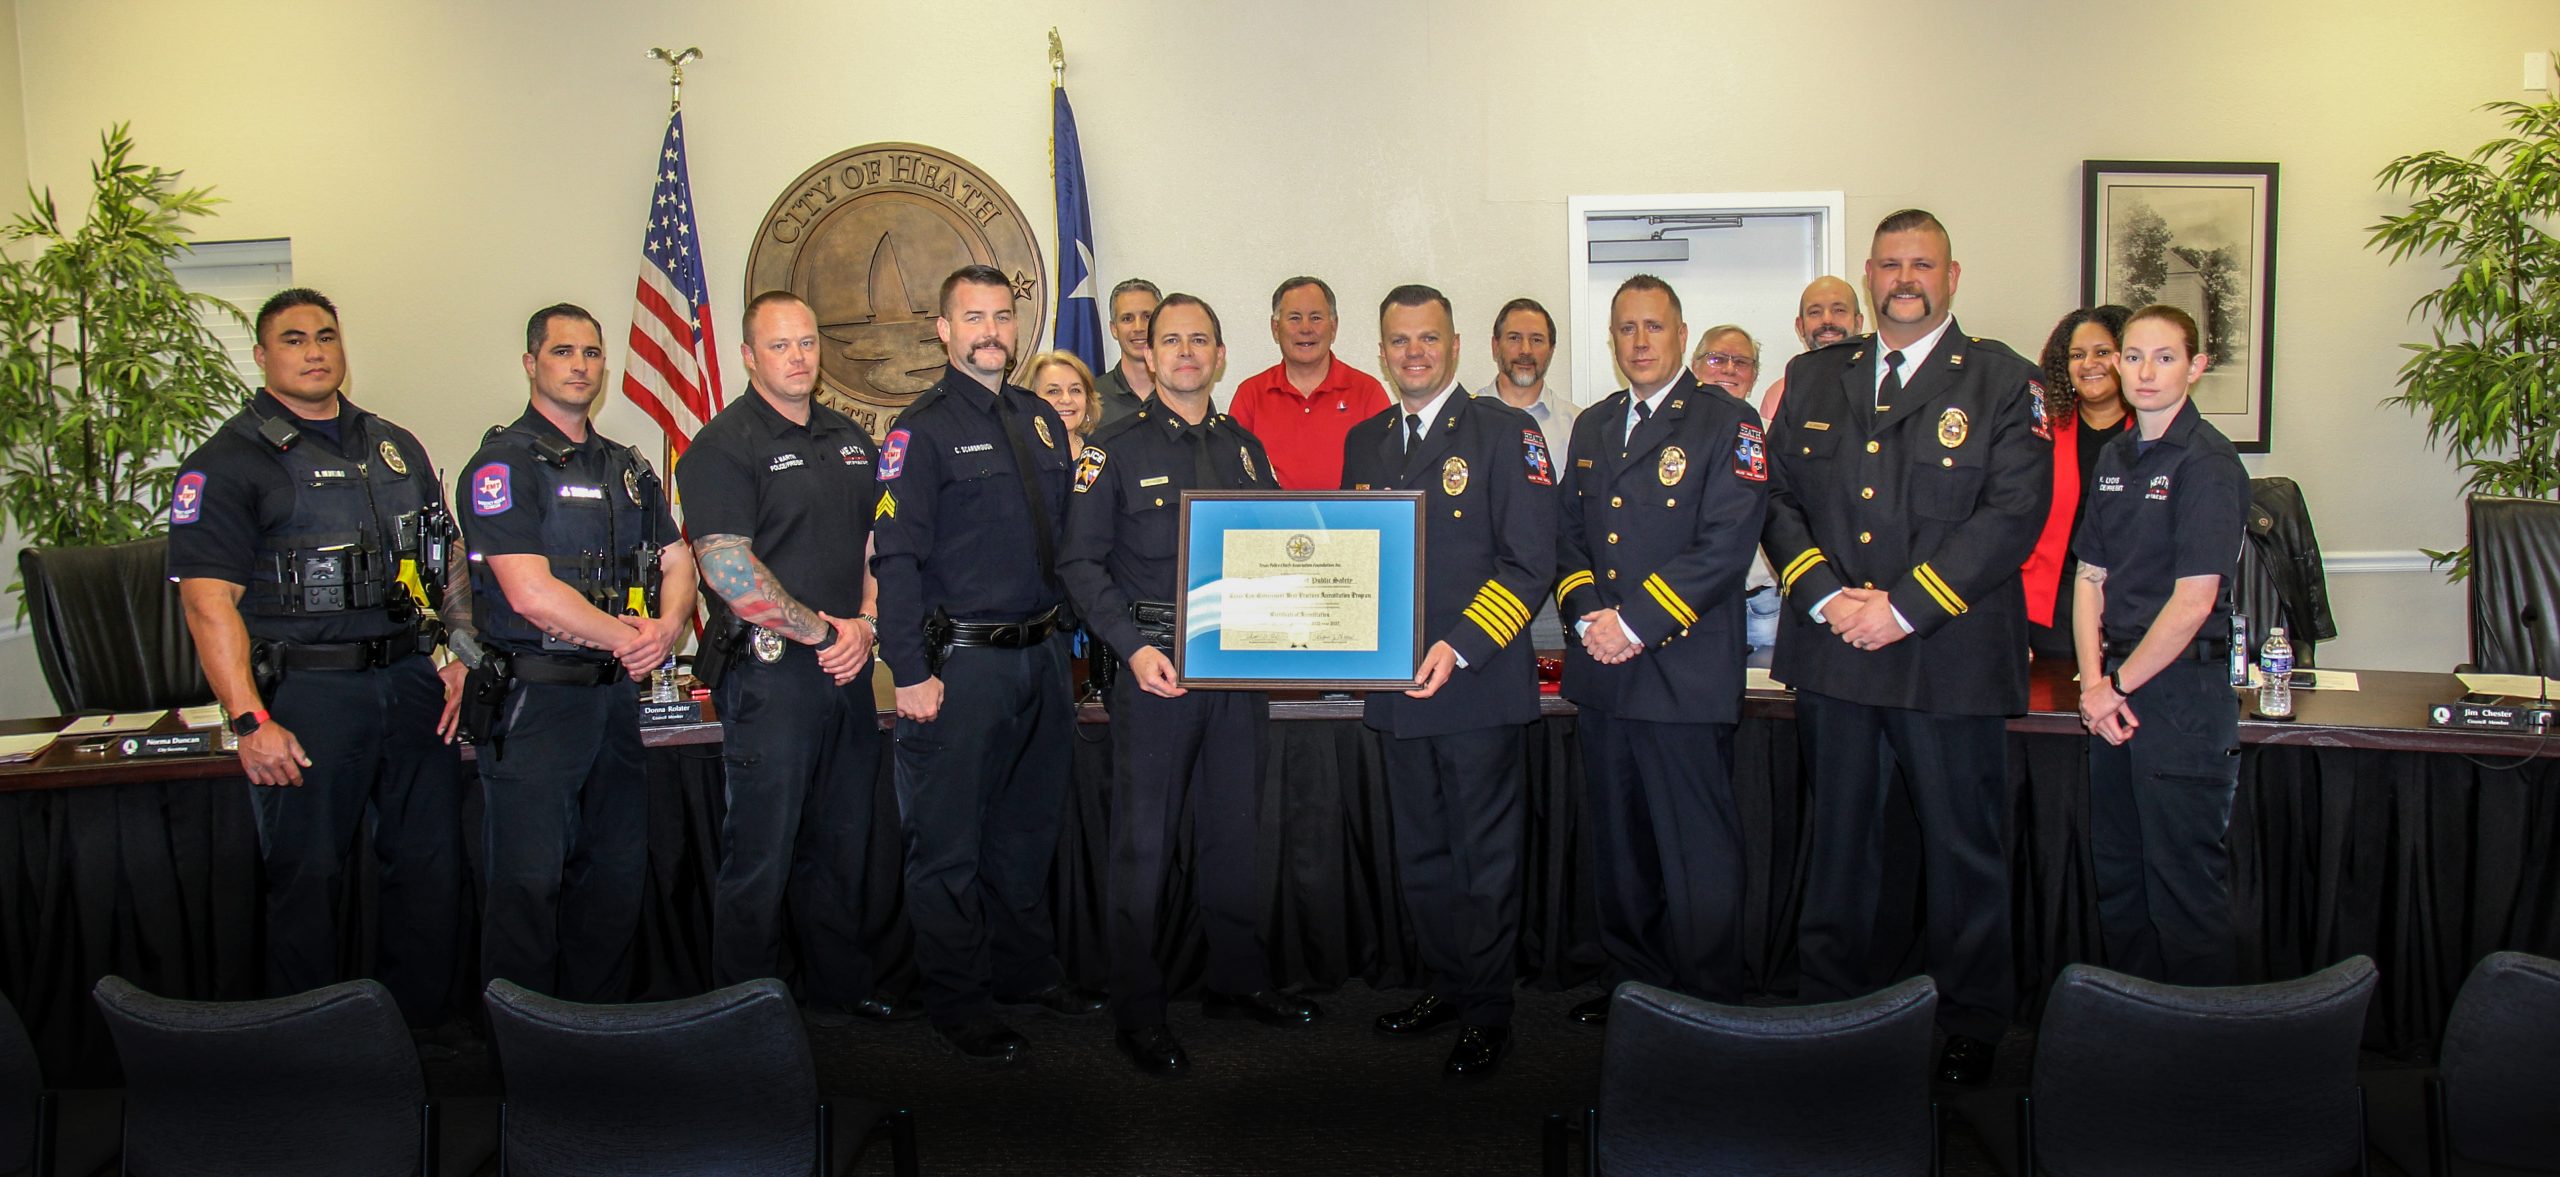 Heath Department of Public Safety receives ‘Accredited Law Enforcement Agency’ Award